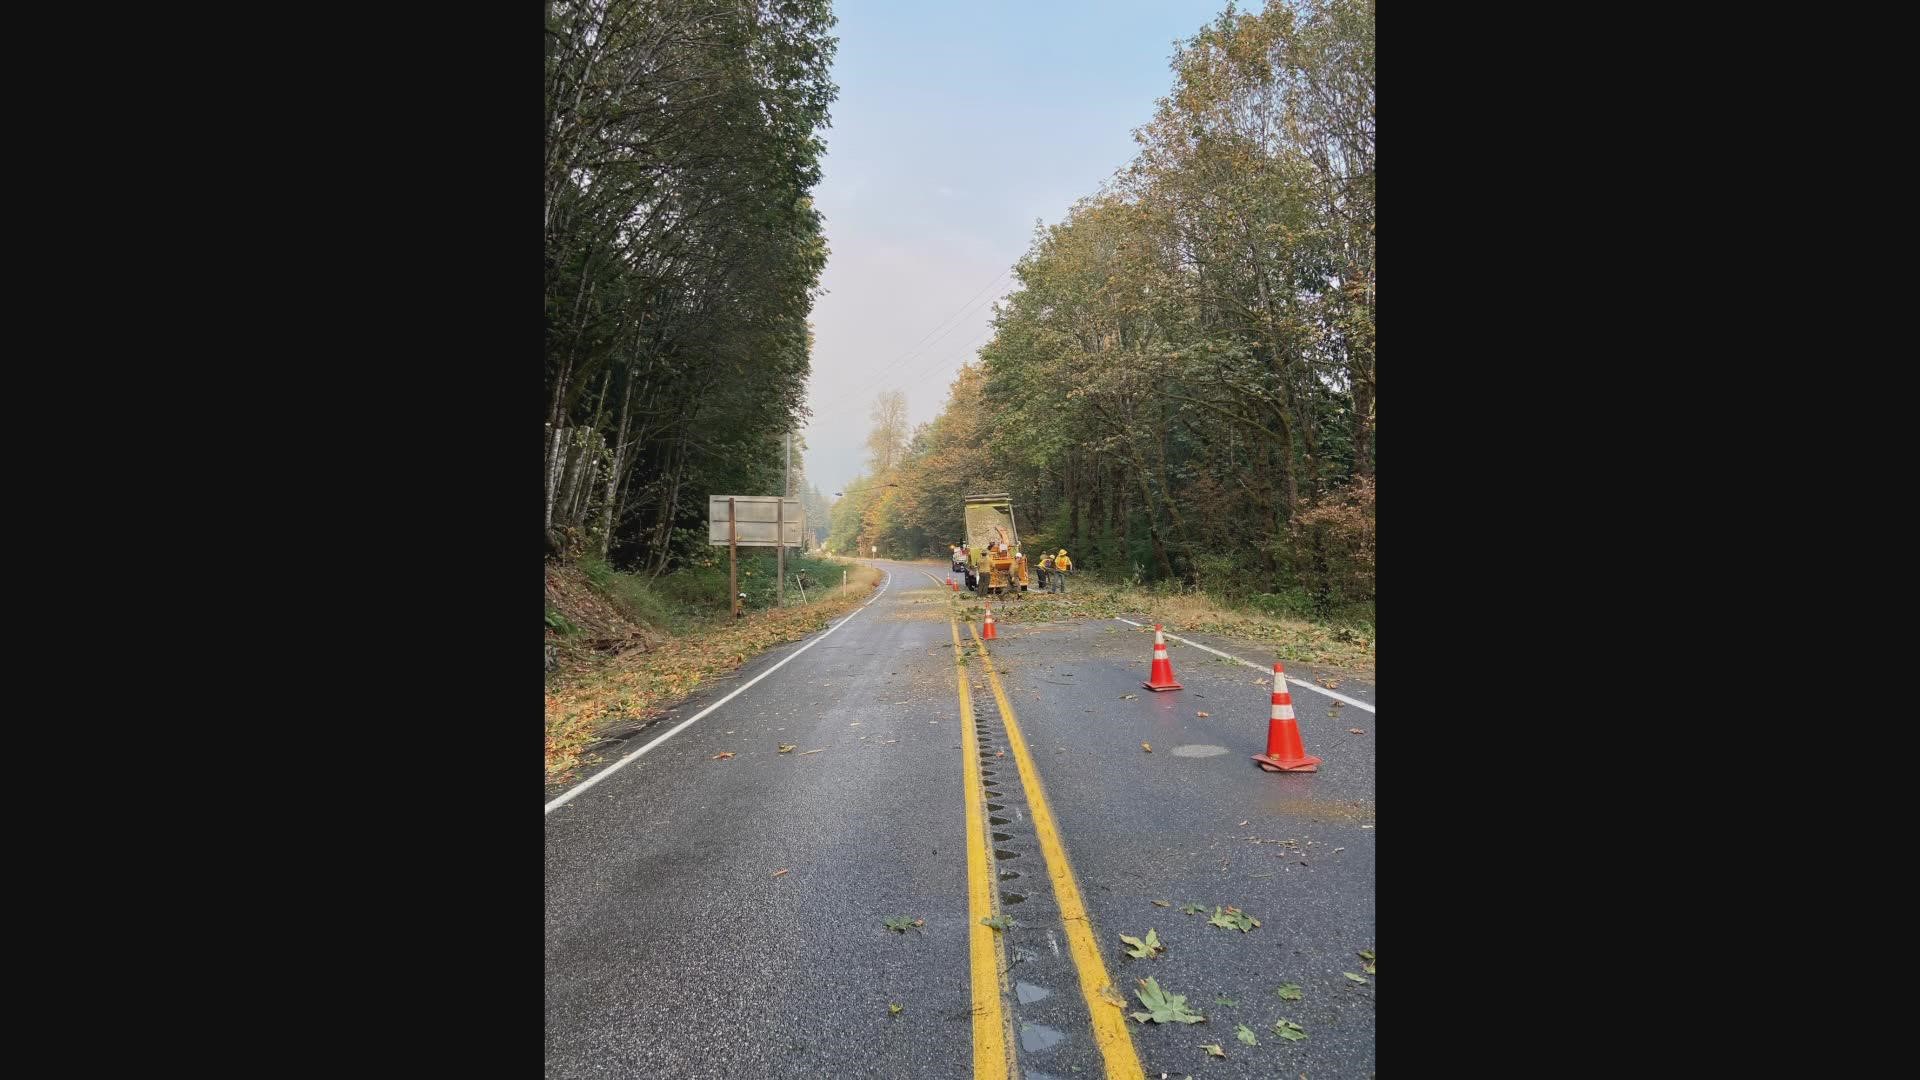 The four-mile stretch of US 2 was closed due to crews removing trees along the highway. That section has reopened at a reduced speed limit.